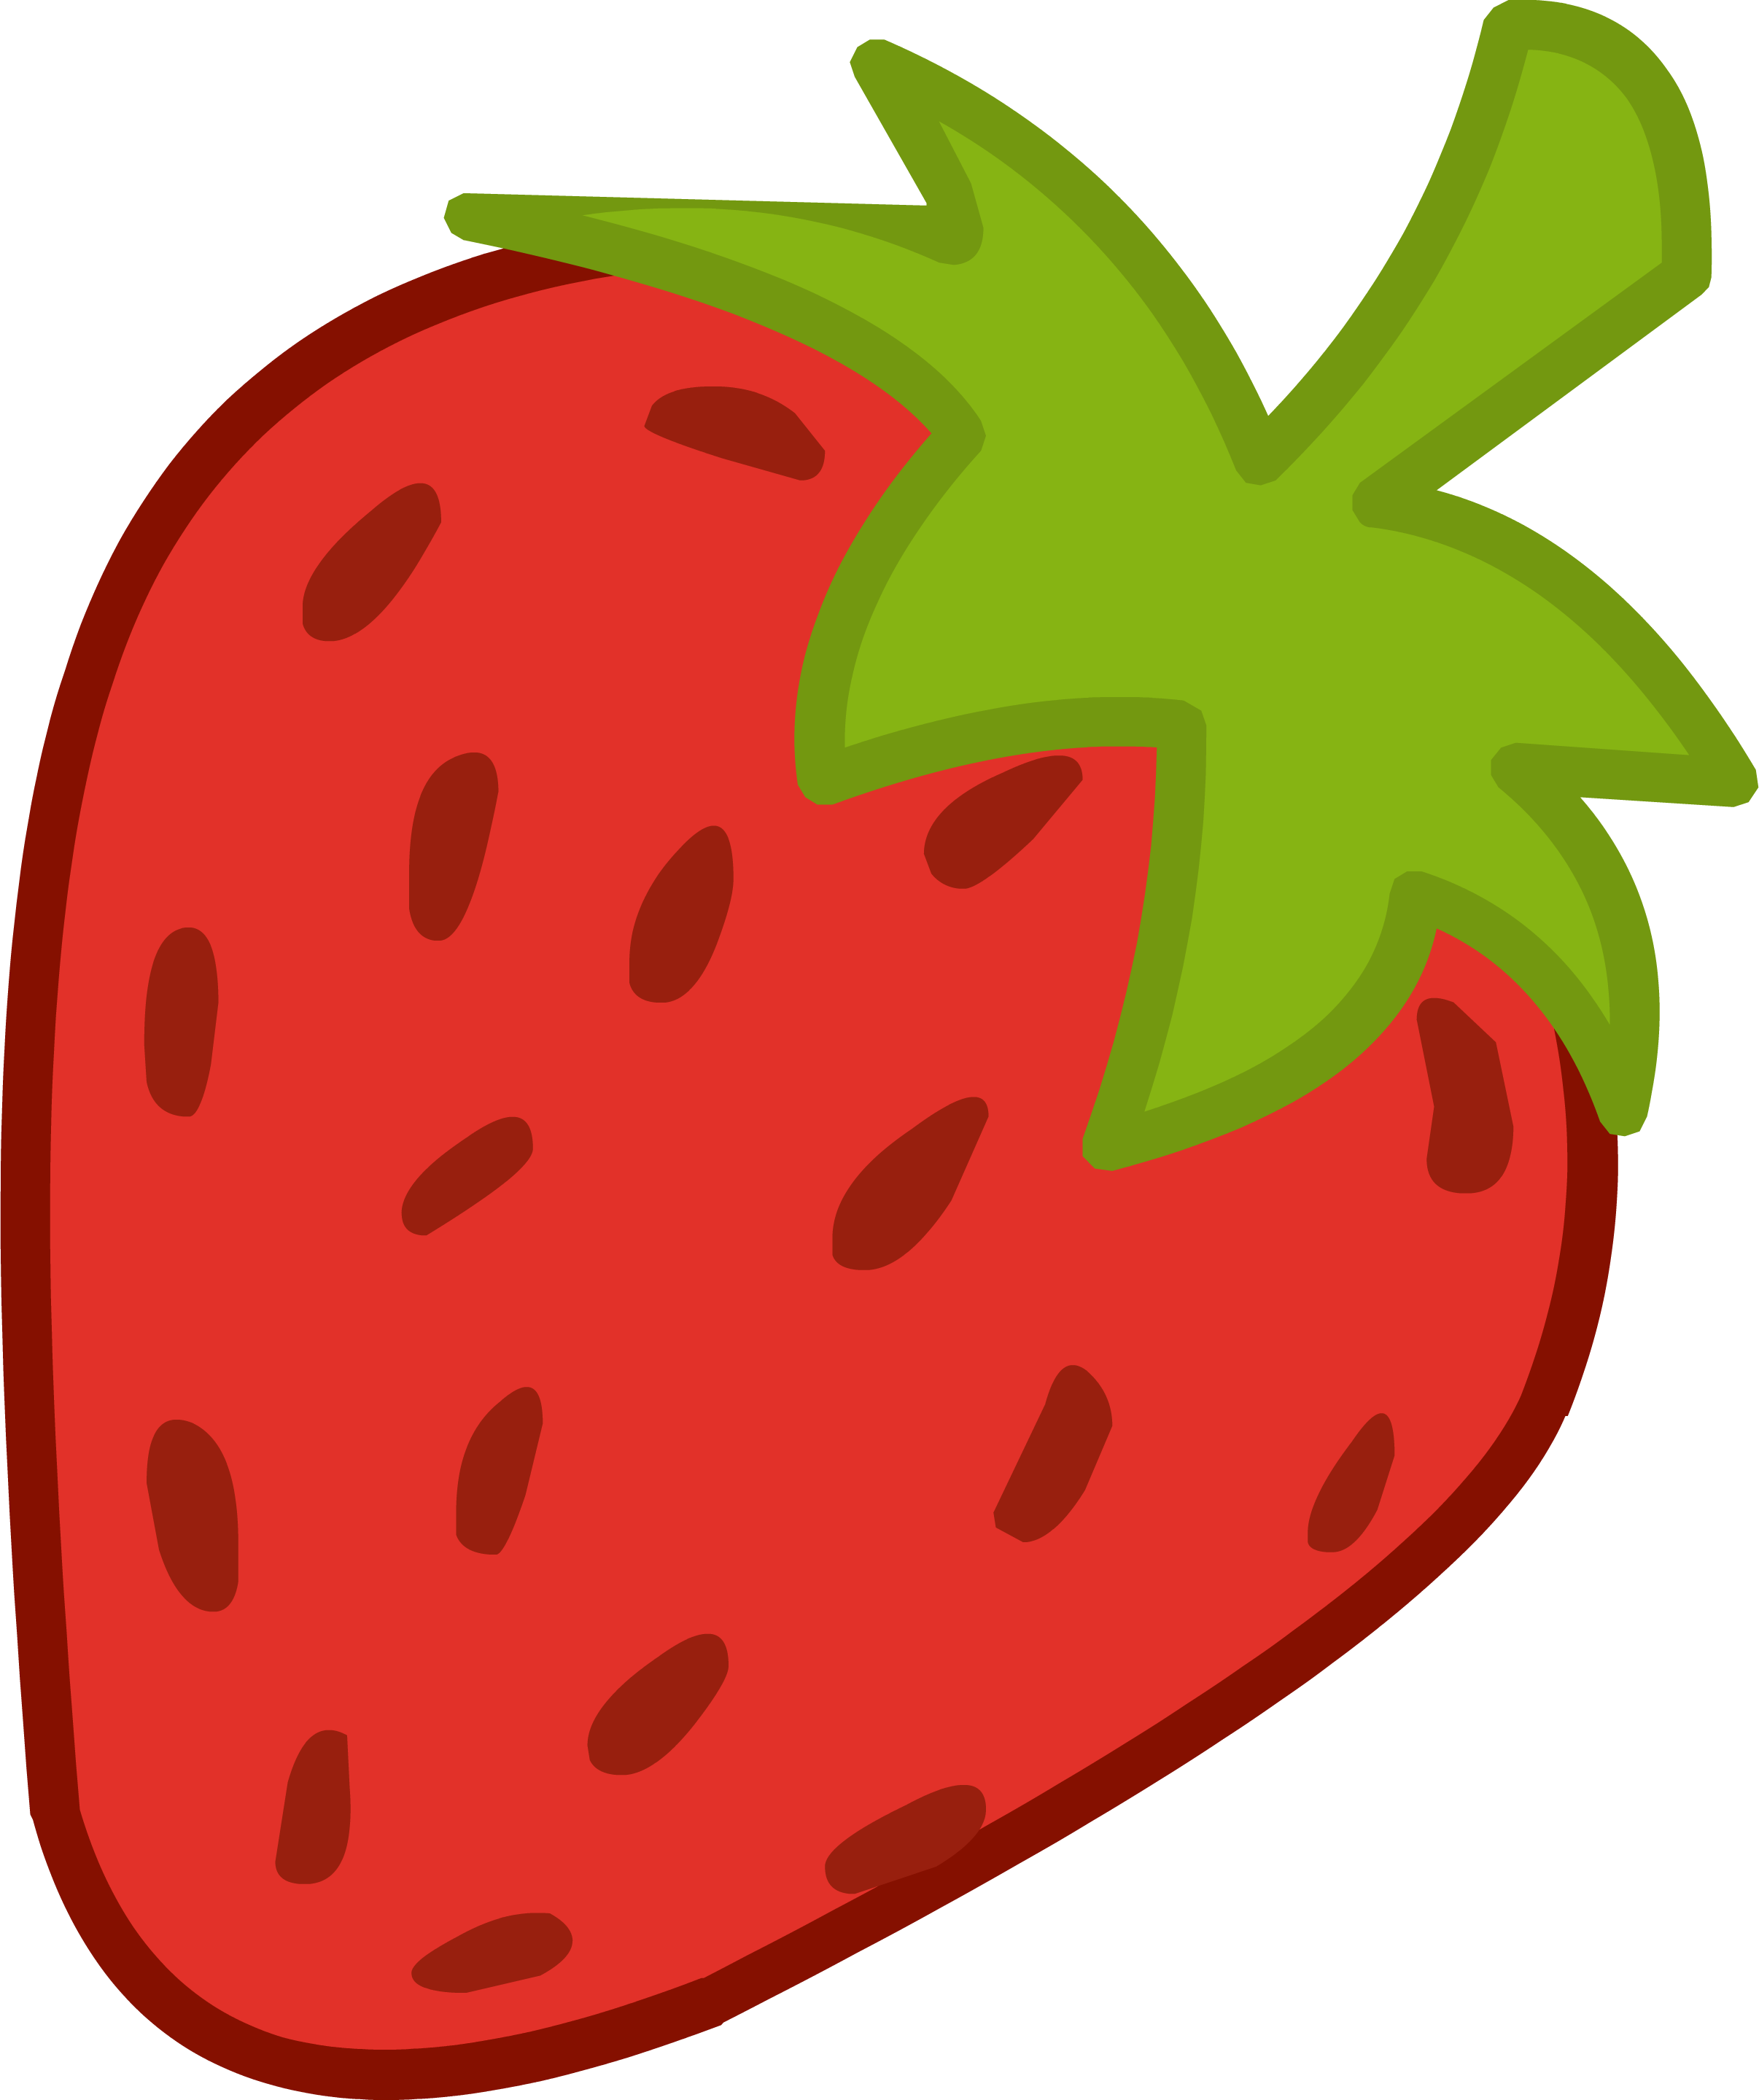 Free Transparent Strawberry, Download Free Transparent Strawberry png ...